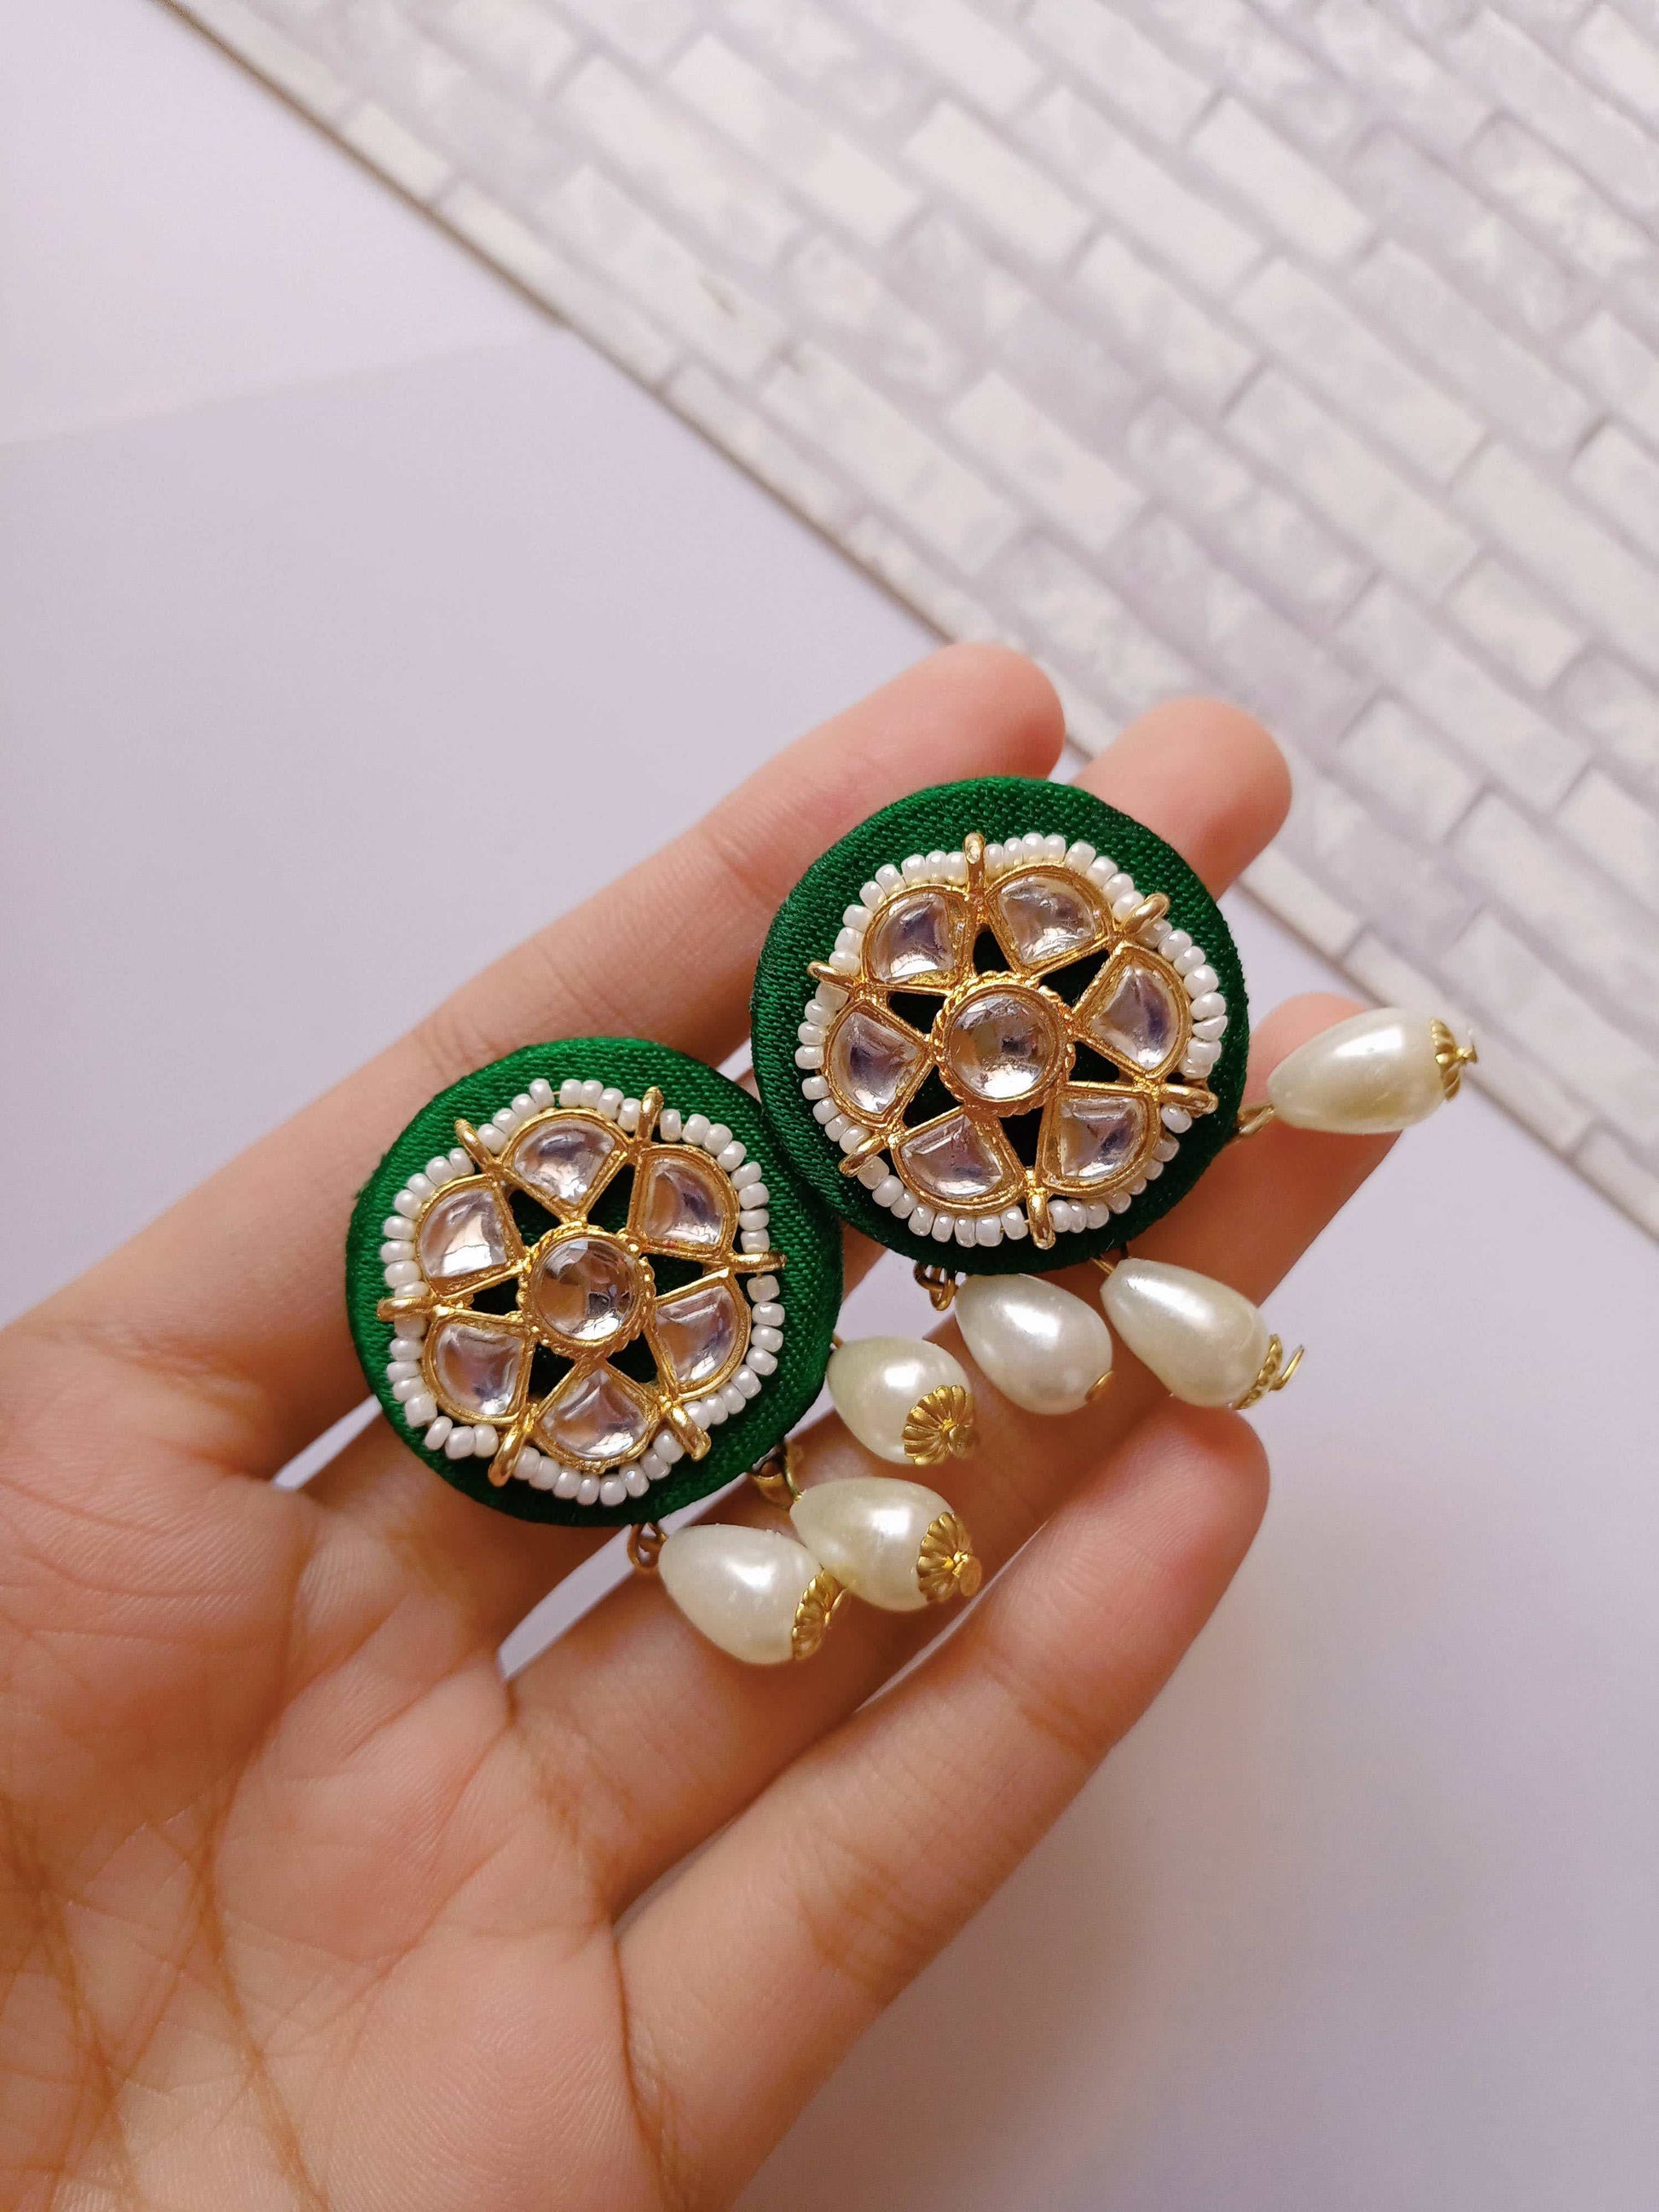 Palm holding Green round studs earrings with white beads and pearls latkan on white backdrop